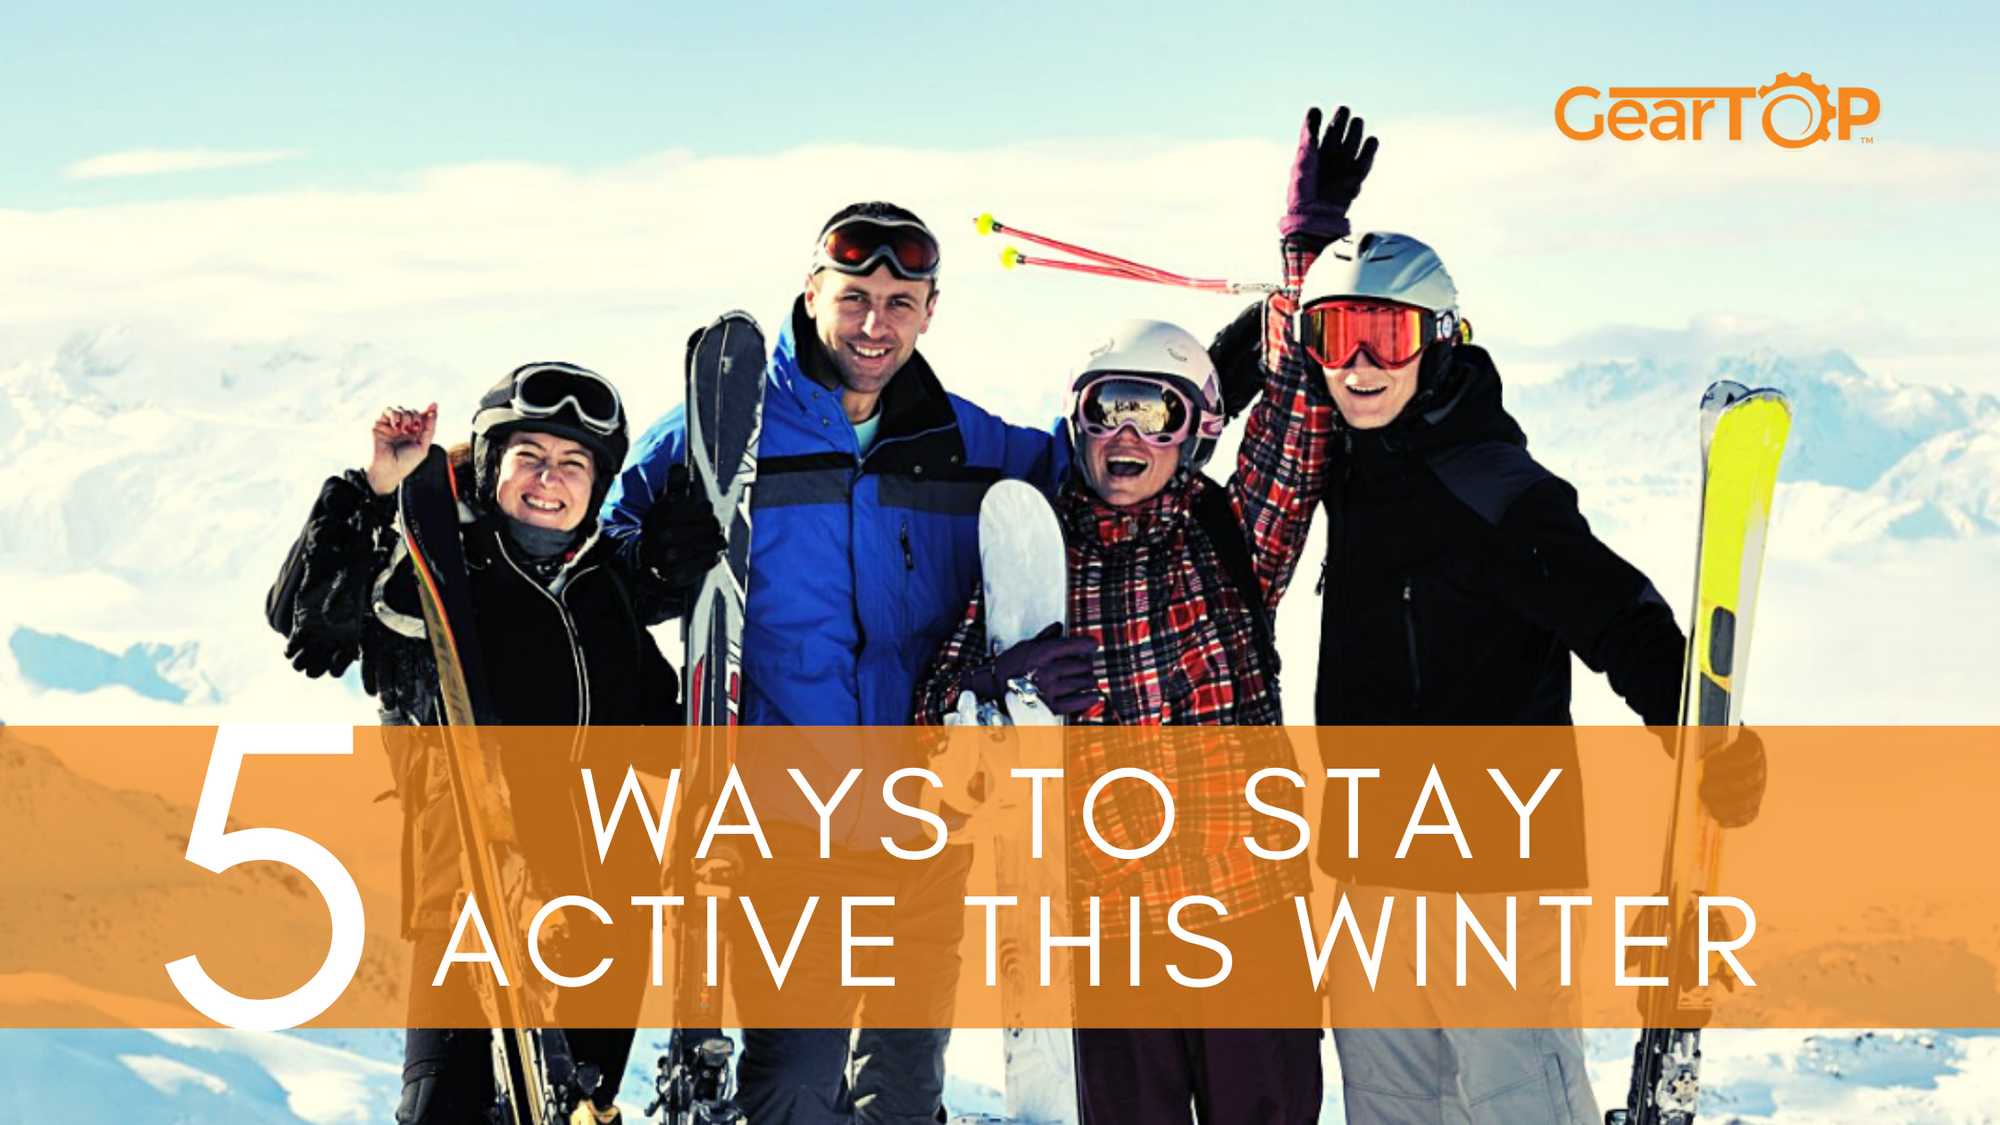 Winter fun: 5 Winter Activities to have fun in the snow